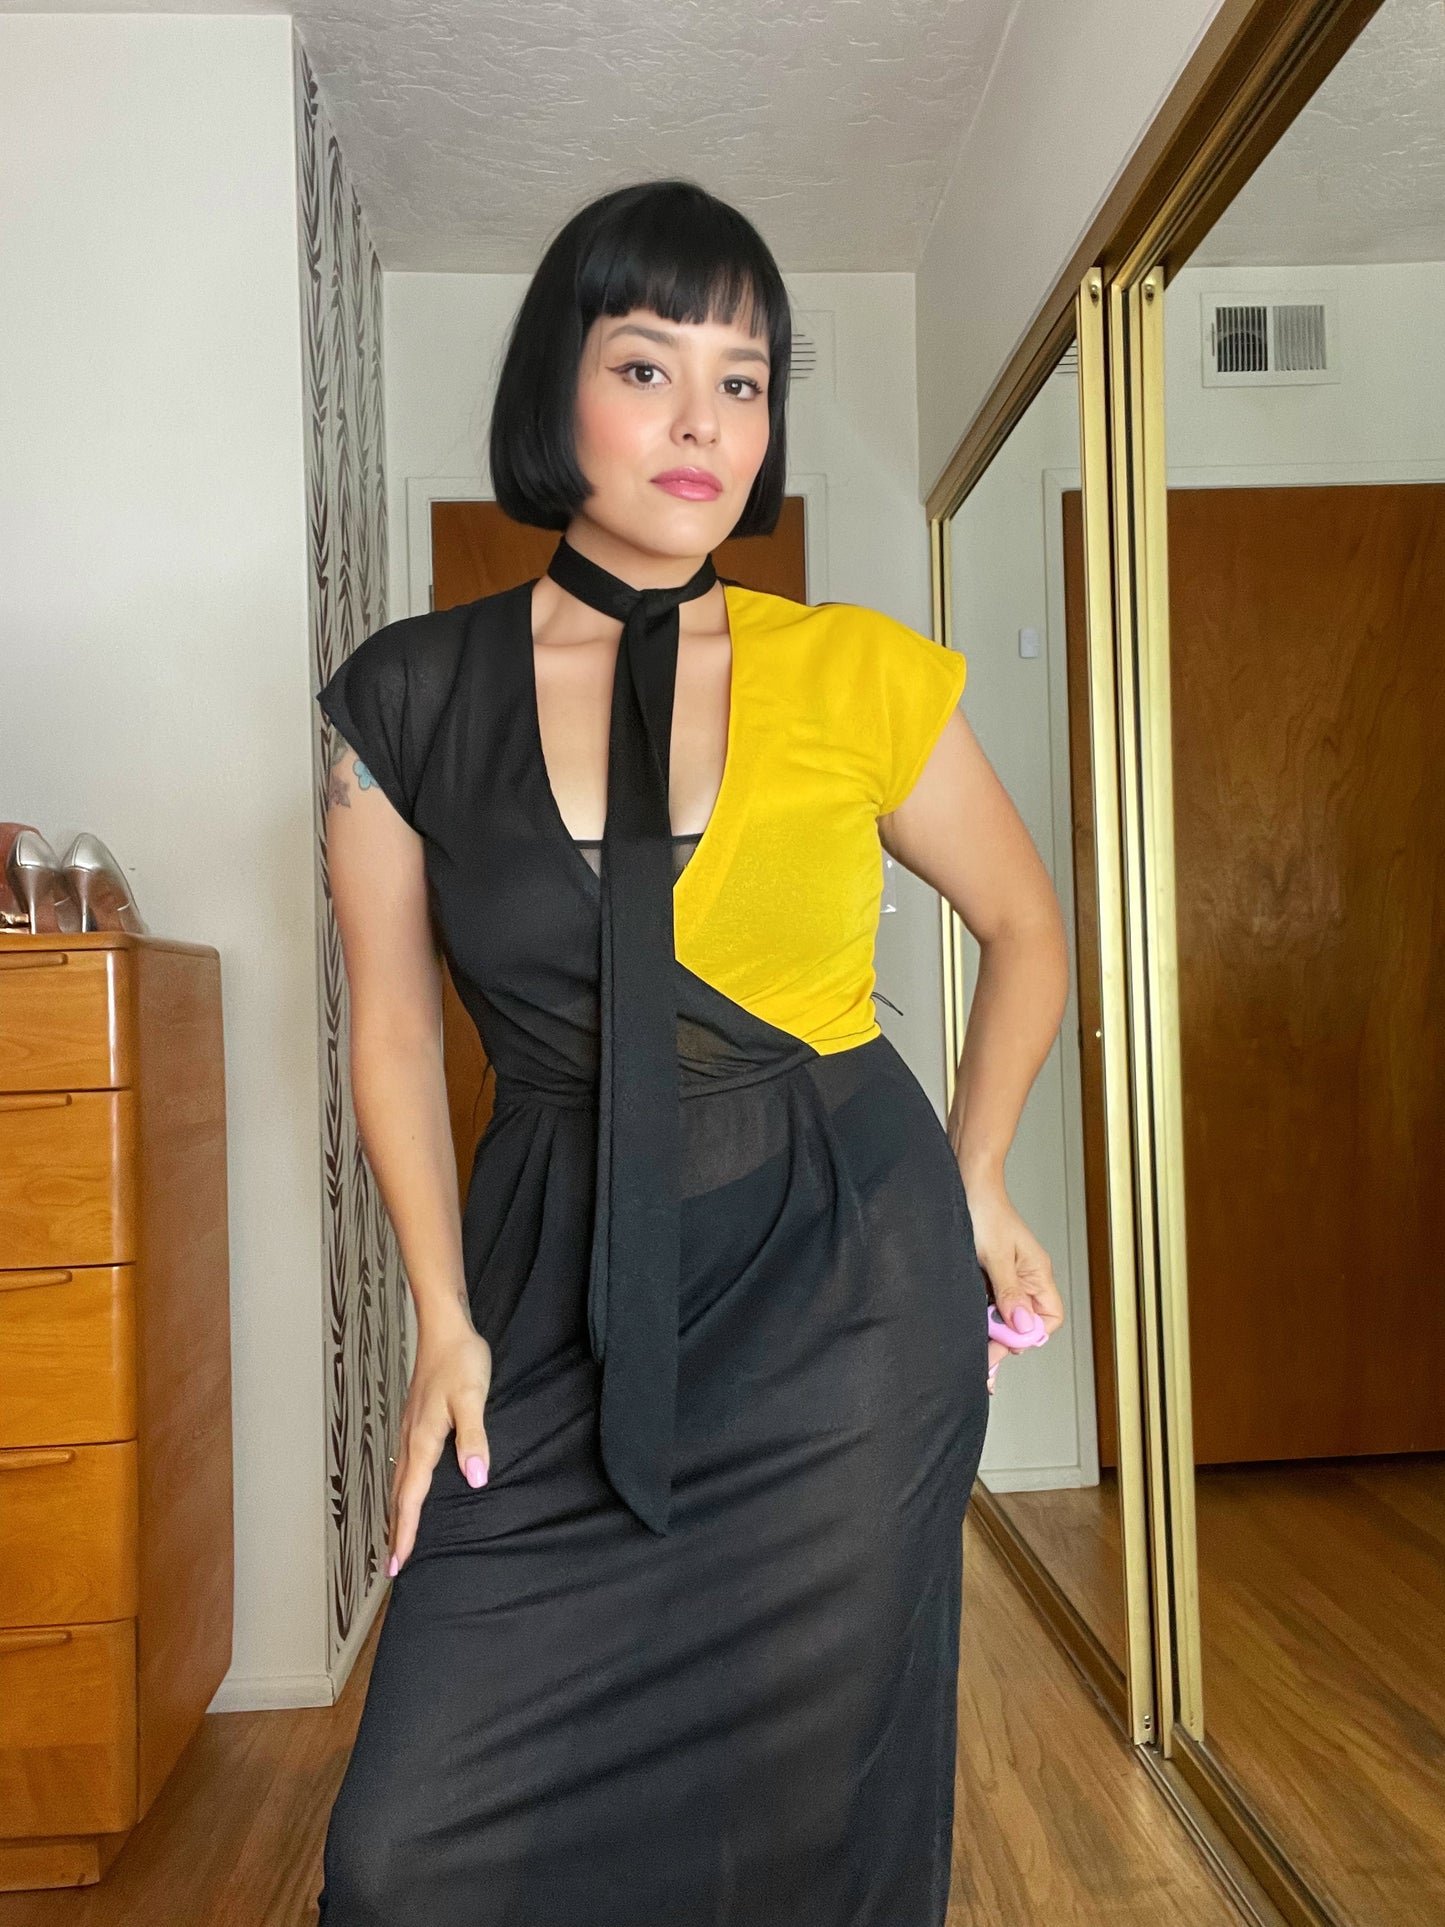 Vintage 70s "Foxy Lady San Francisco" Yellow and Black Block Color Semi Sheer Maxi Dress Fits Sizes XS-S, Possible M